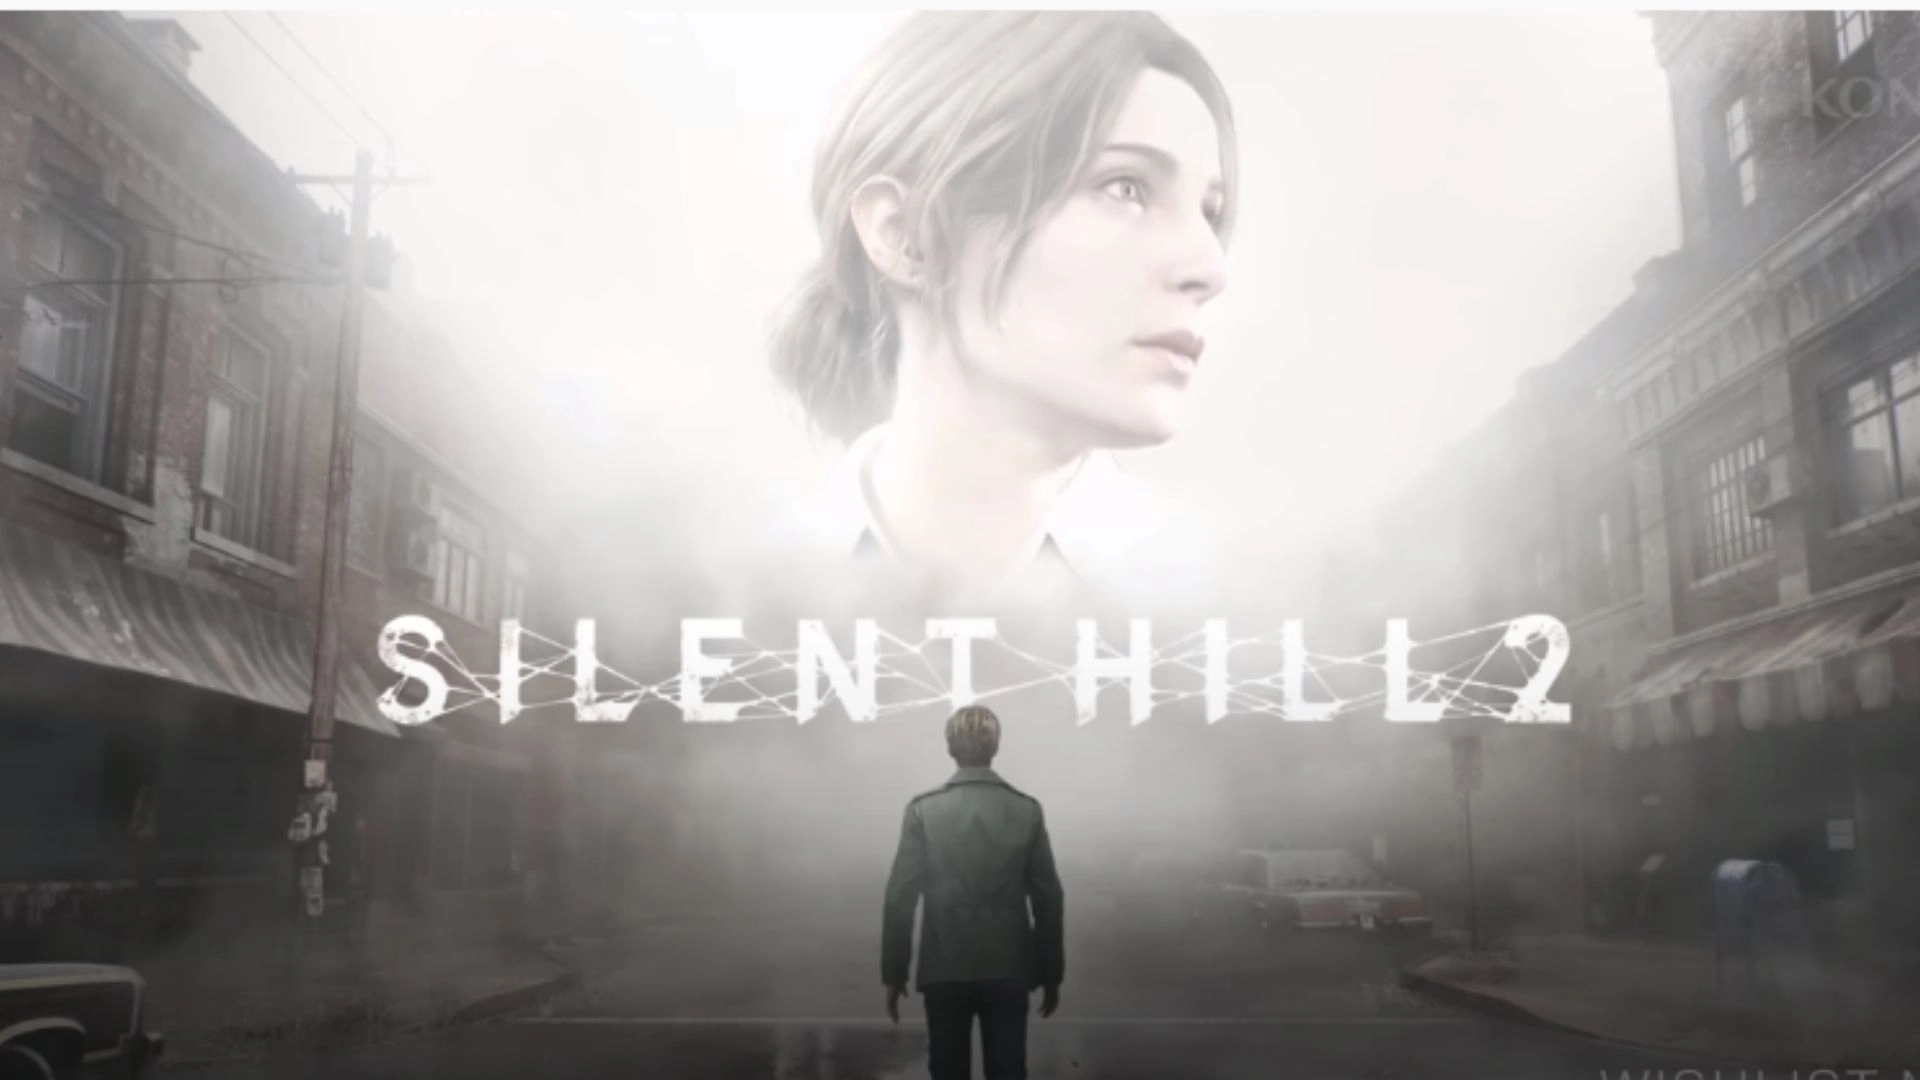 SILENT HILL 2 Parents Guide and Age Rating (2022)